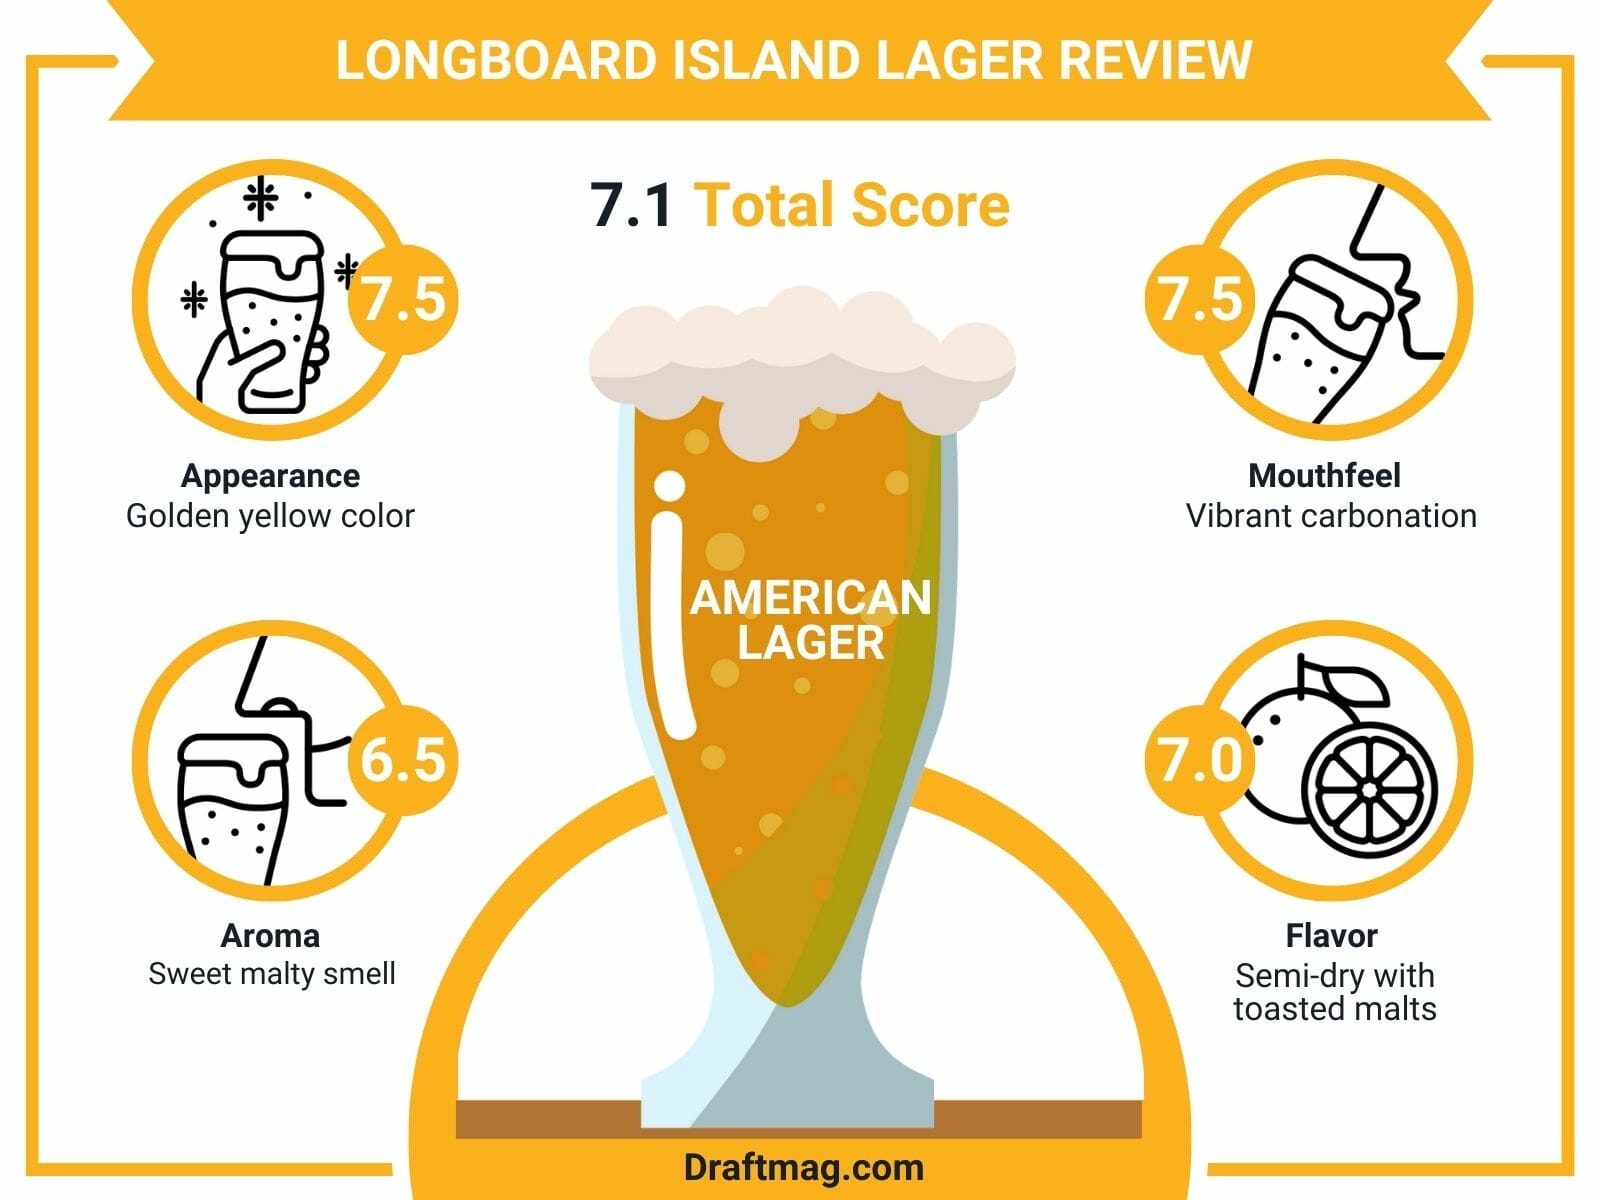 Longboard Island Lager Review Infographic